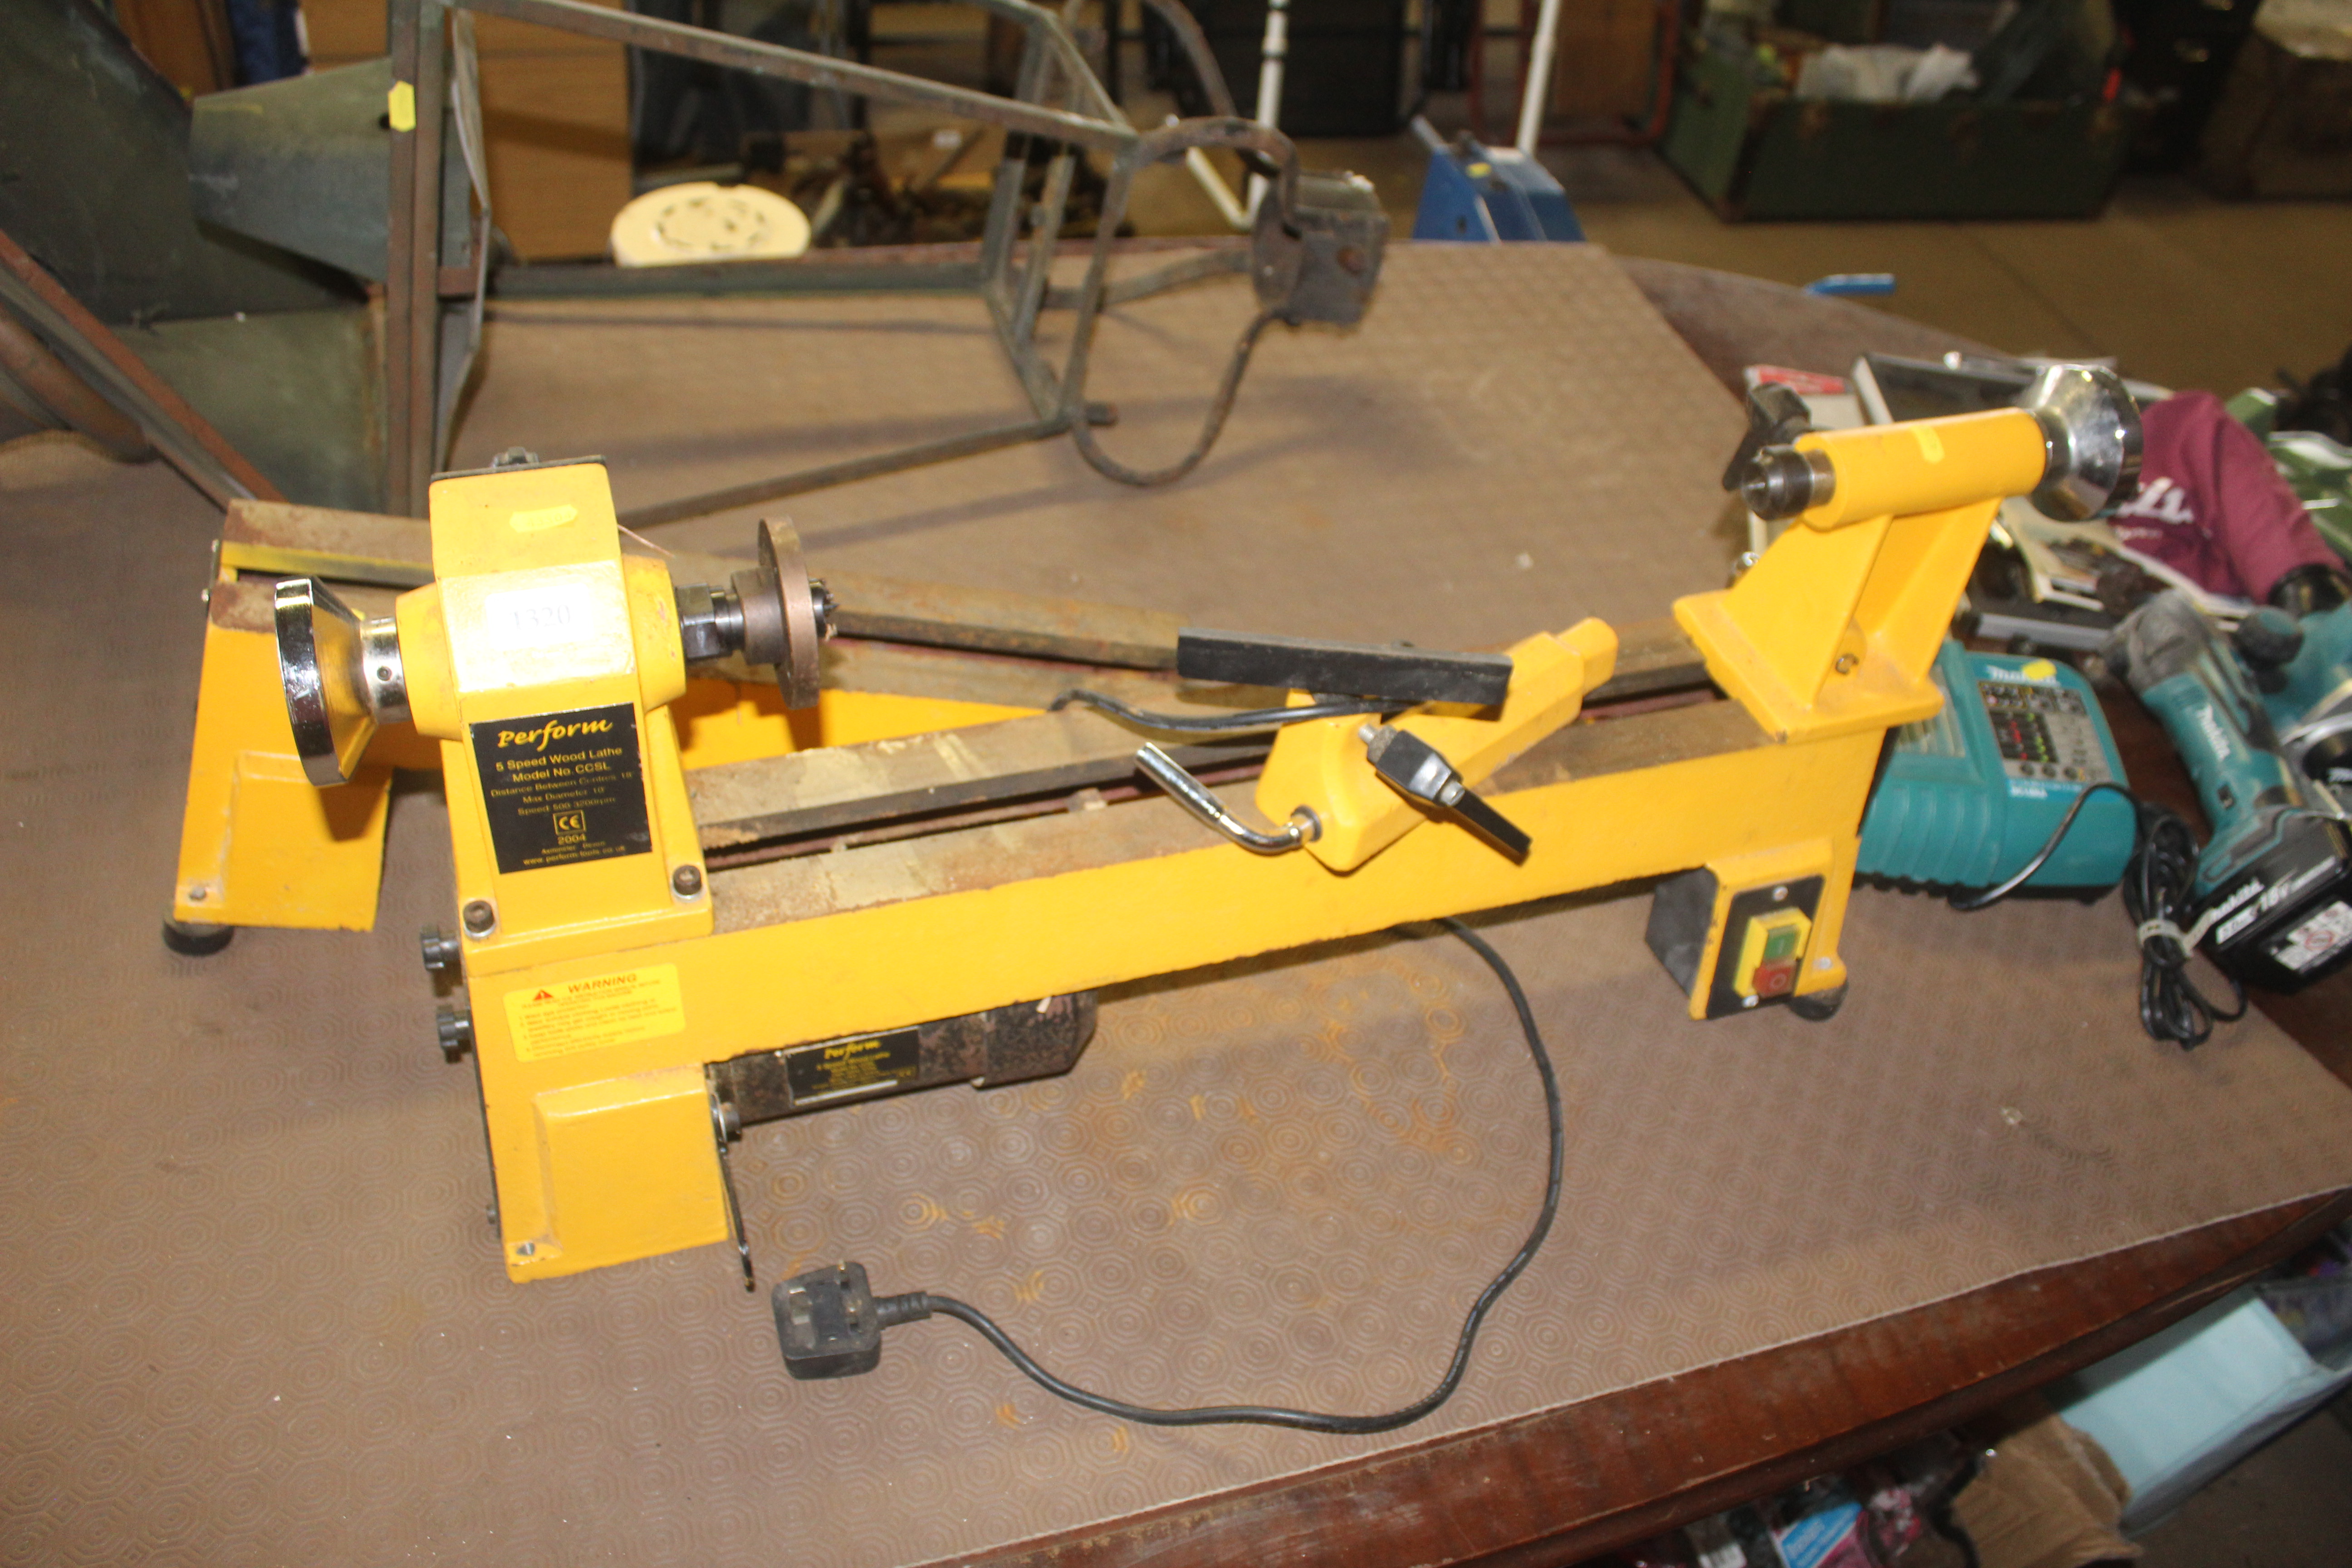 A Perform five speed wood lathe with lathe extensi